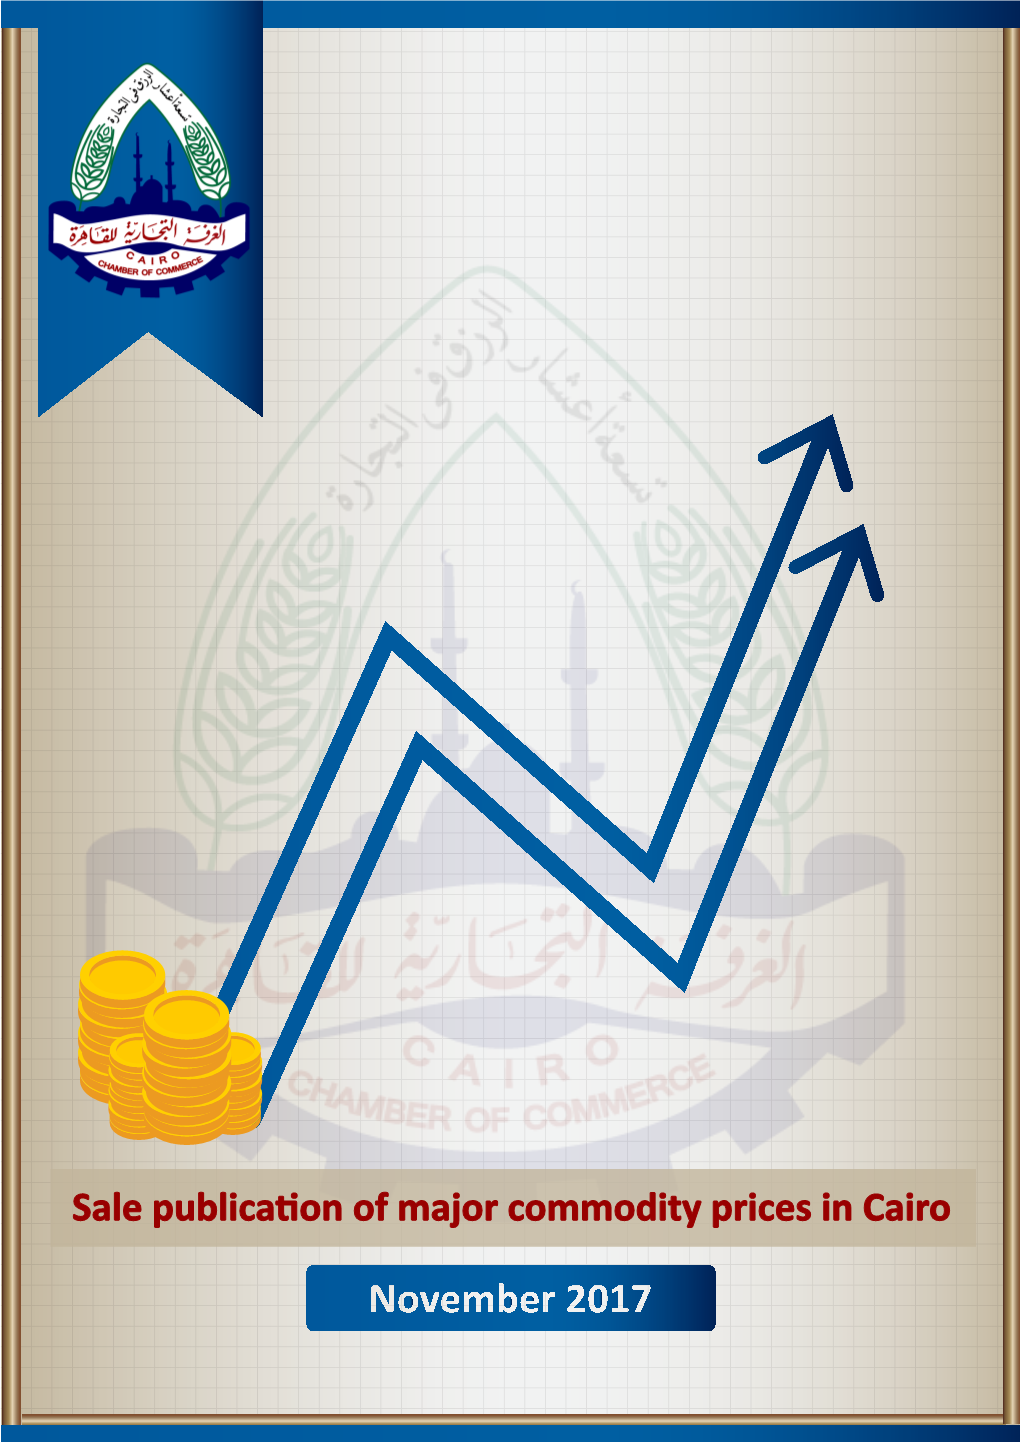 Sale Publication of Major Commodity Prices in Cairo Sale Publication of Major Commodity Prices in Cairo